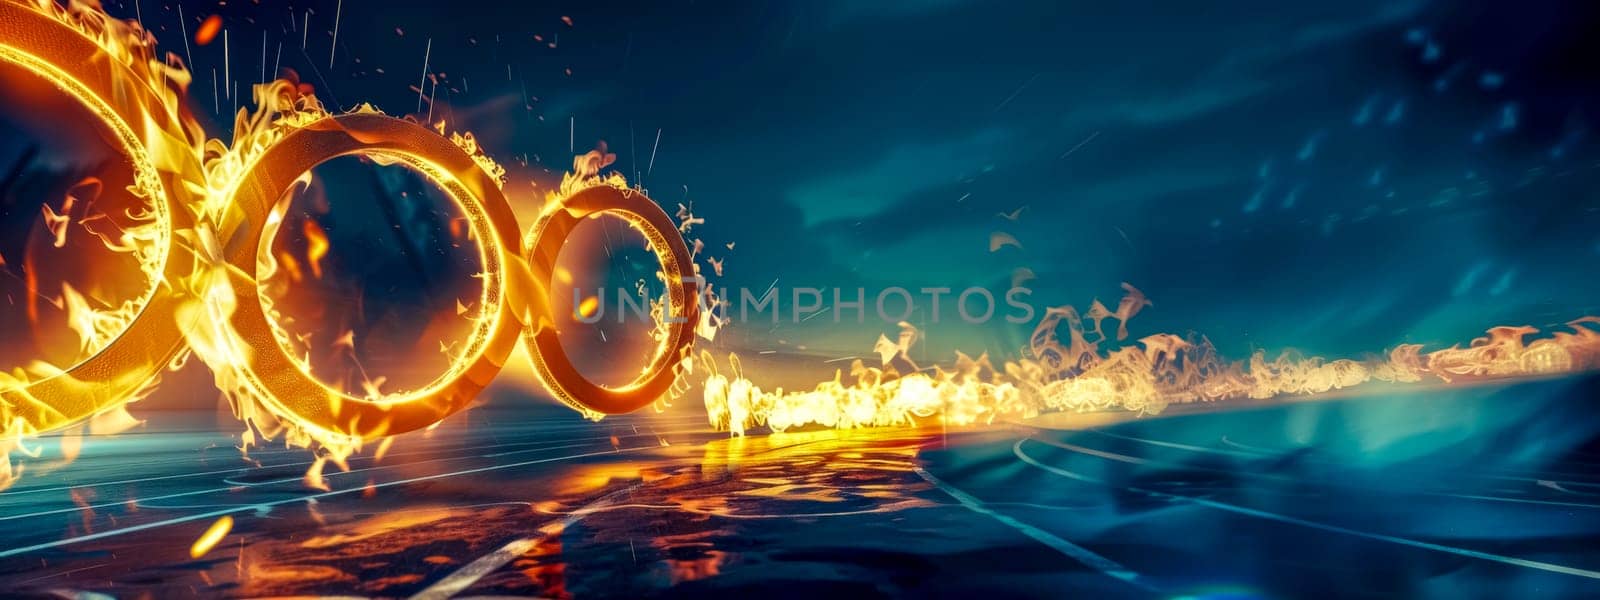 Fiery rings on racetrack at night by Edophoto